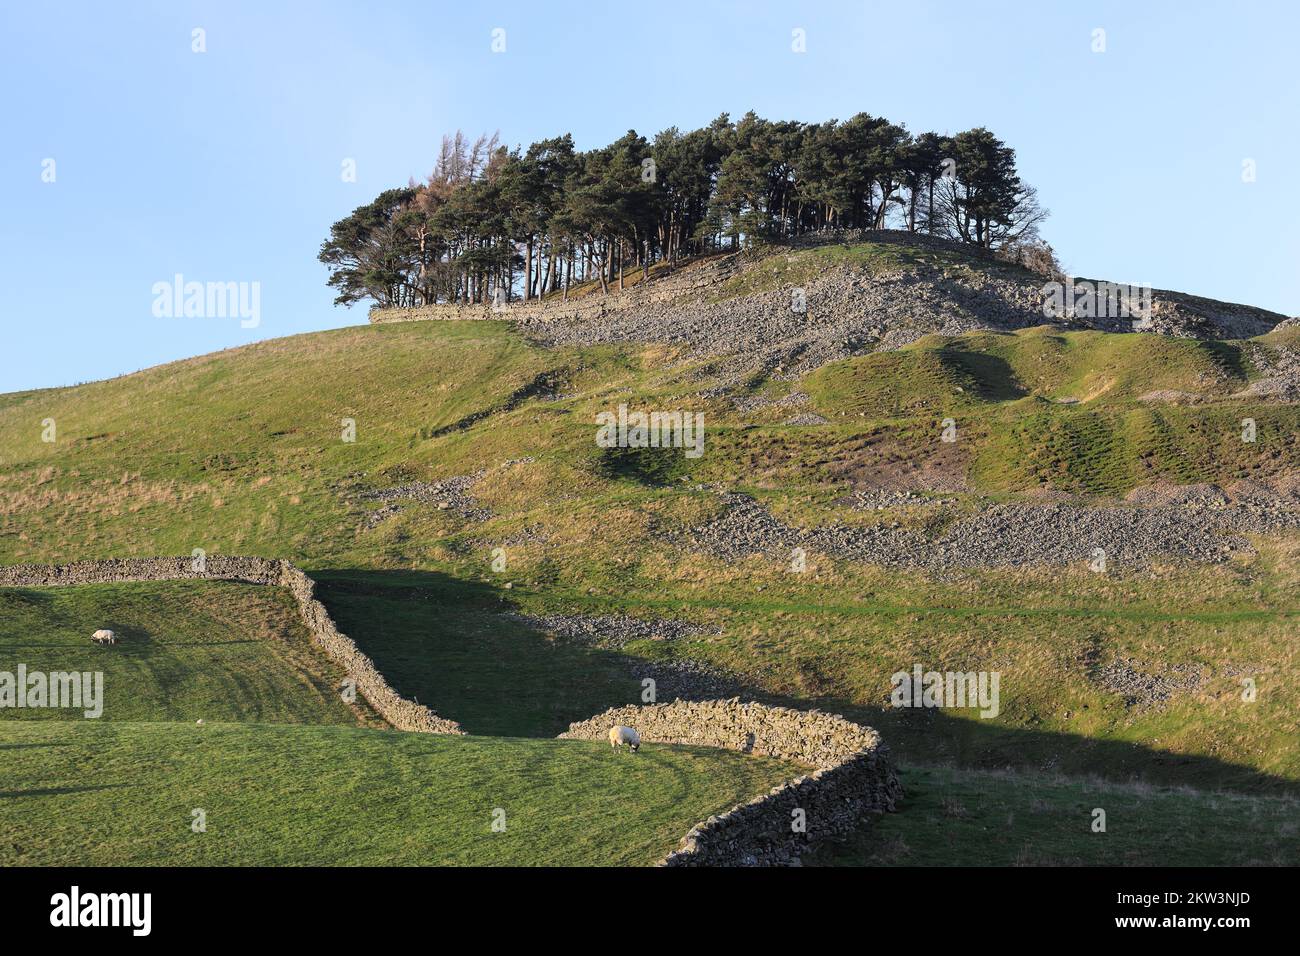 The Tree Covered Burial Mound of Kirkcarrion near Middleton-in-Teesdale, Teesdale, County Durham, UK Stock Photo